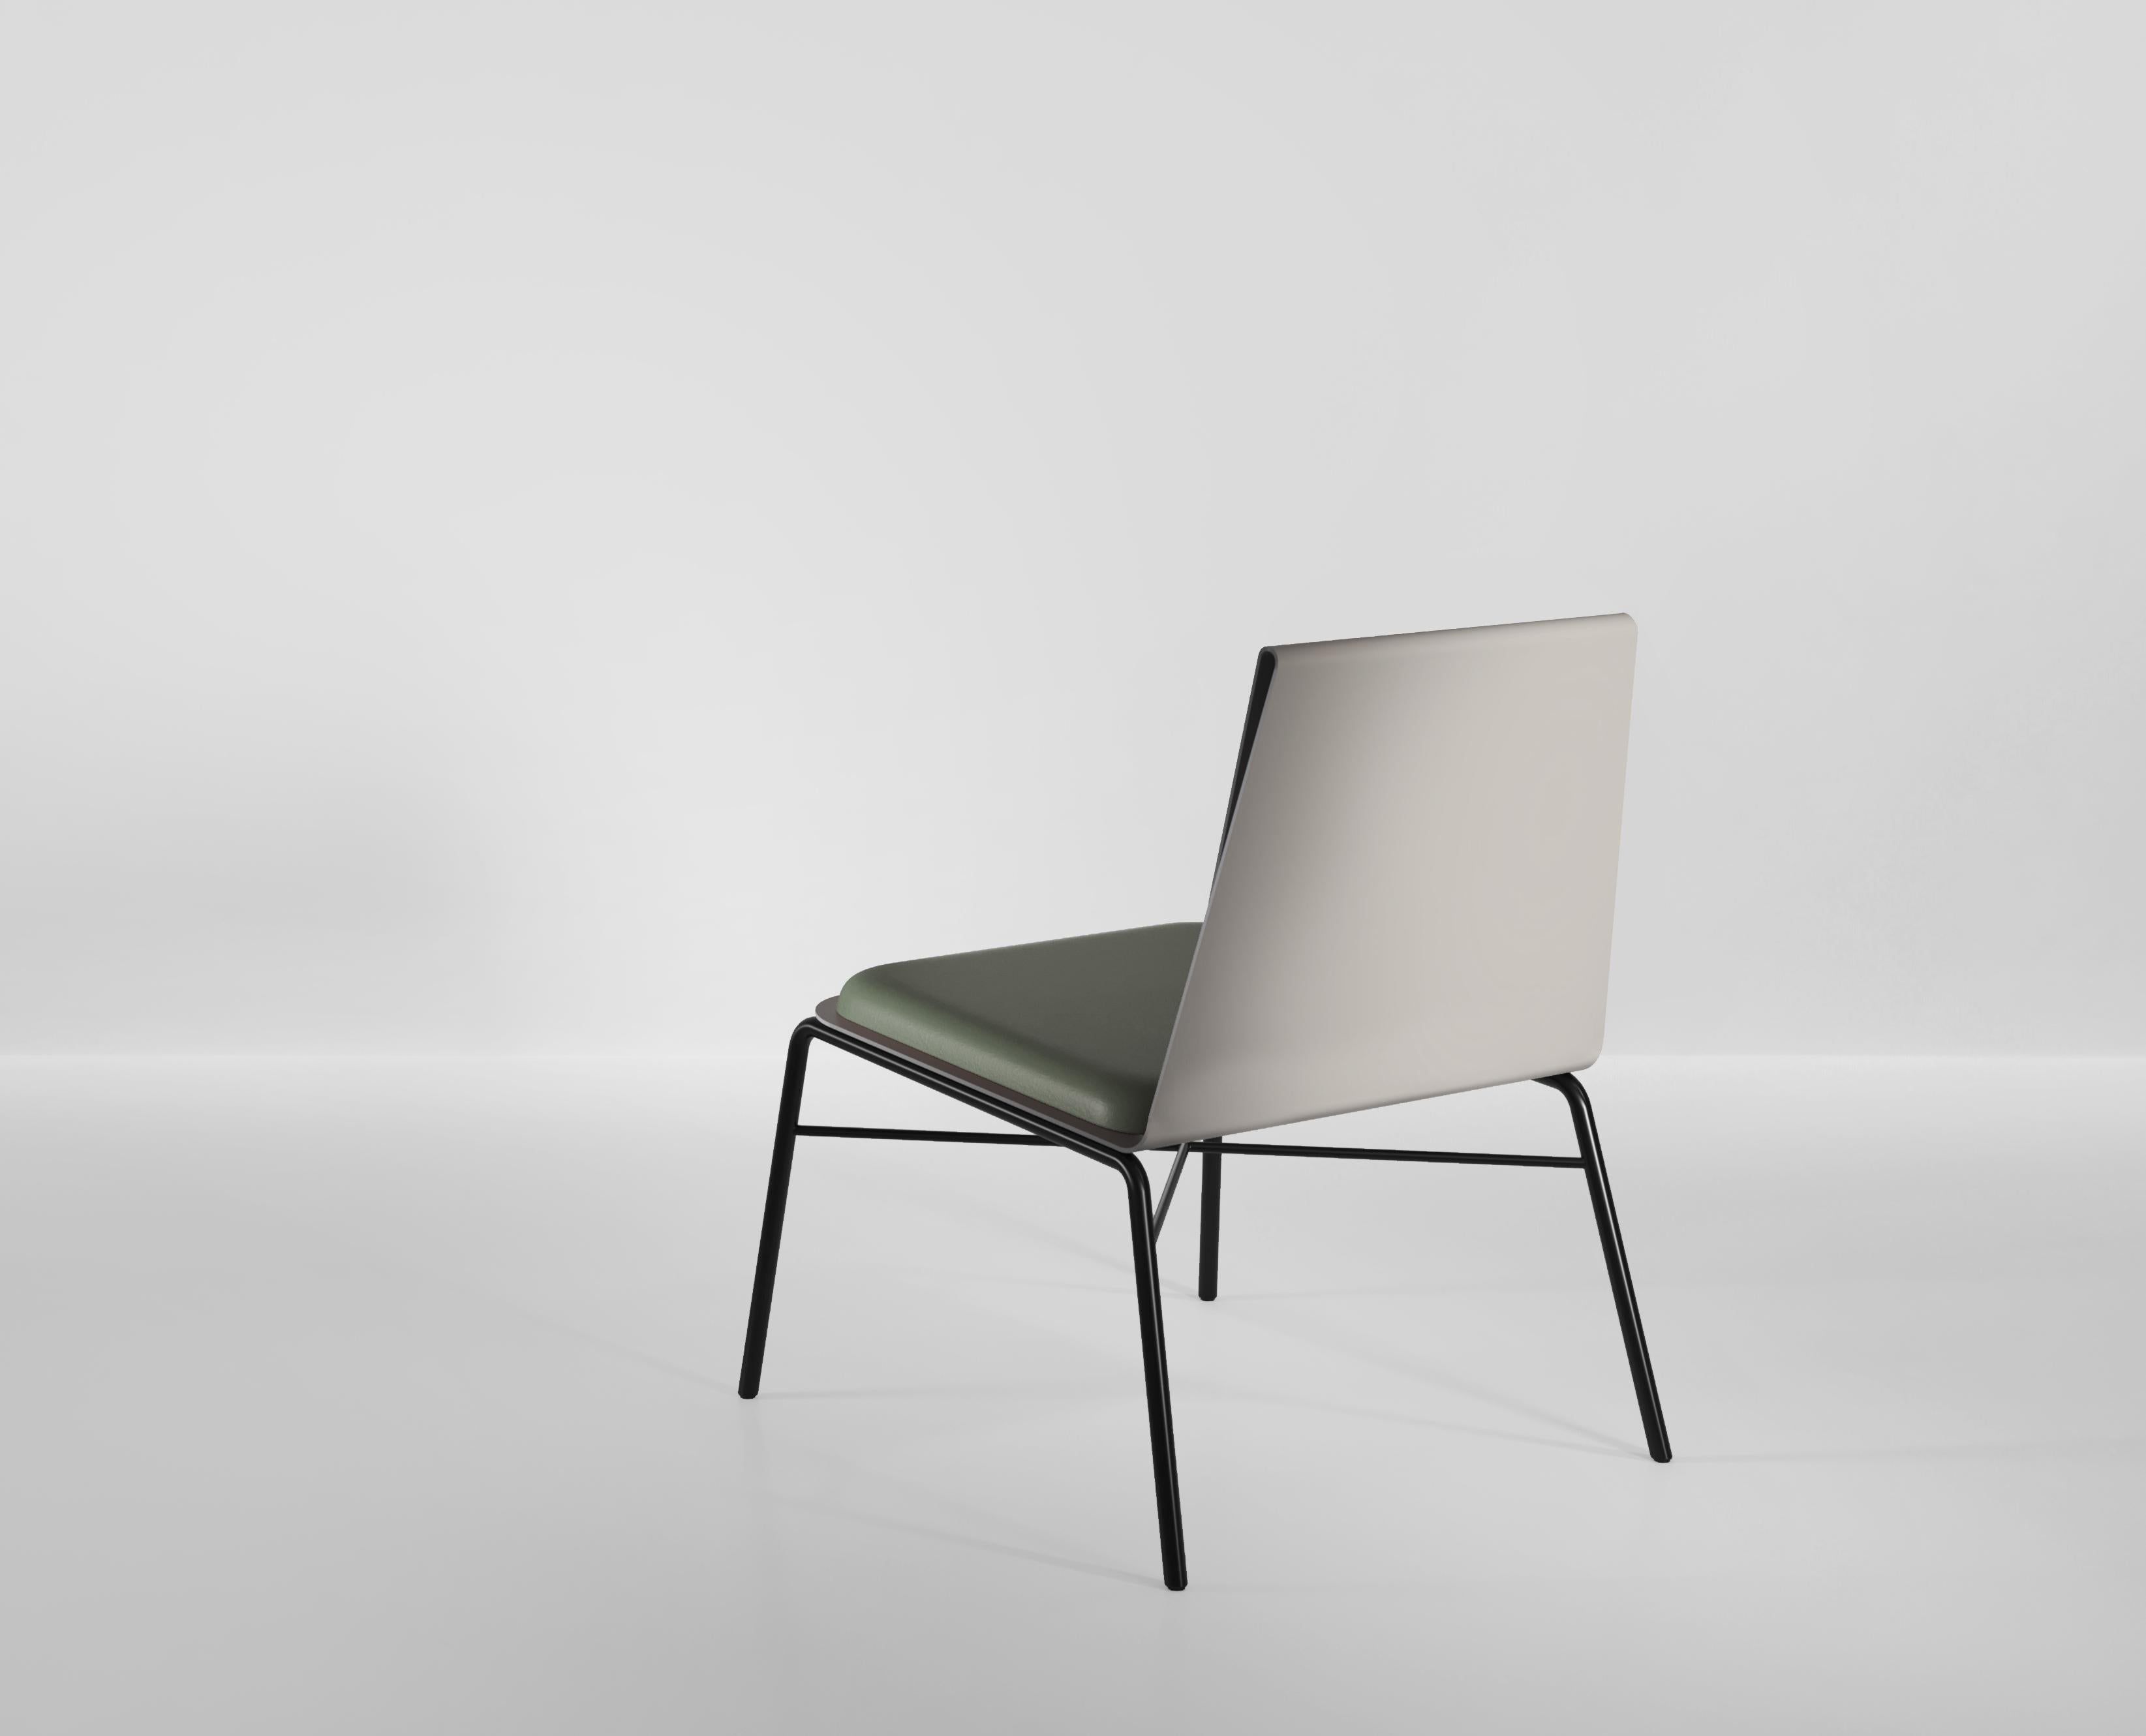 Italian Fold Contemporary Lounge Chair in Metal and Fabric by Artefatto Design Studio